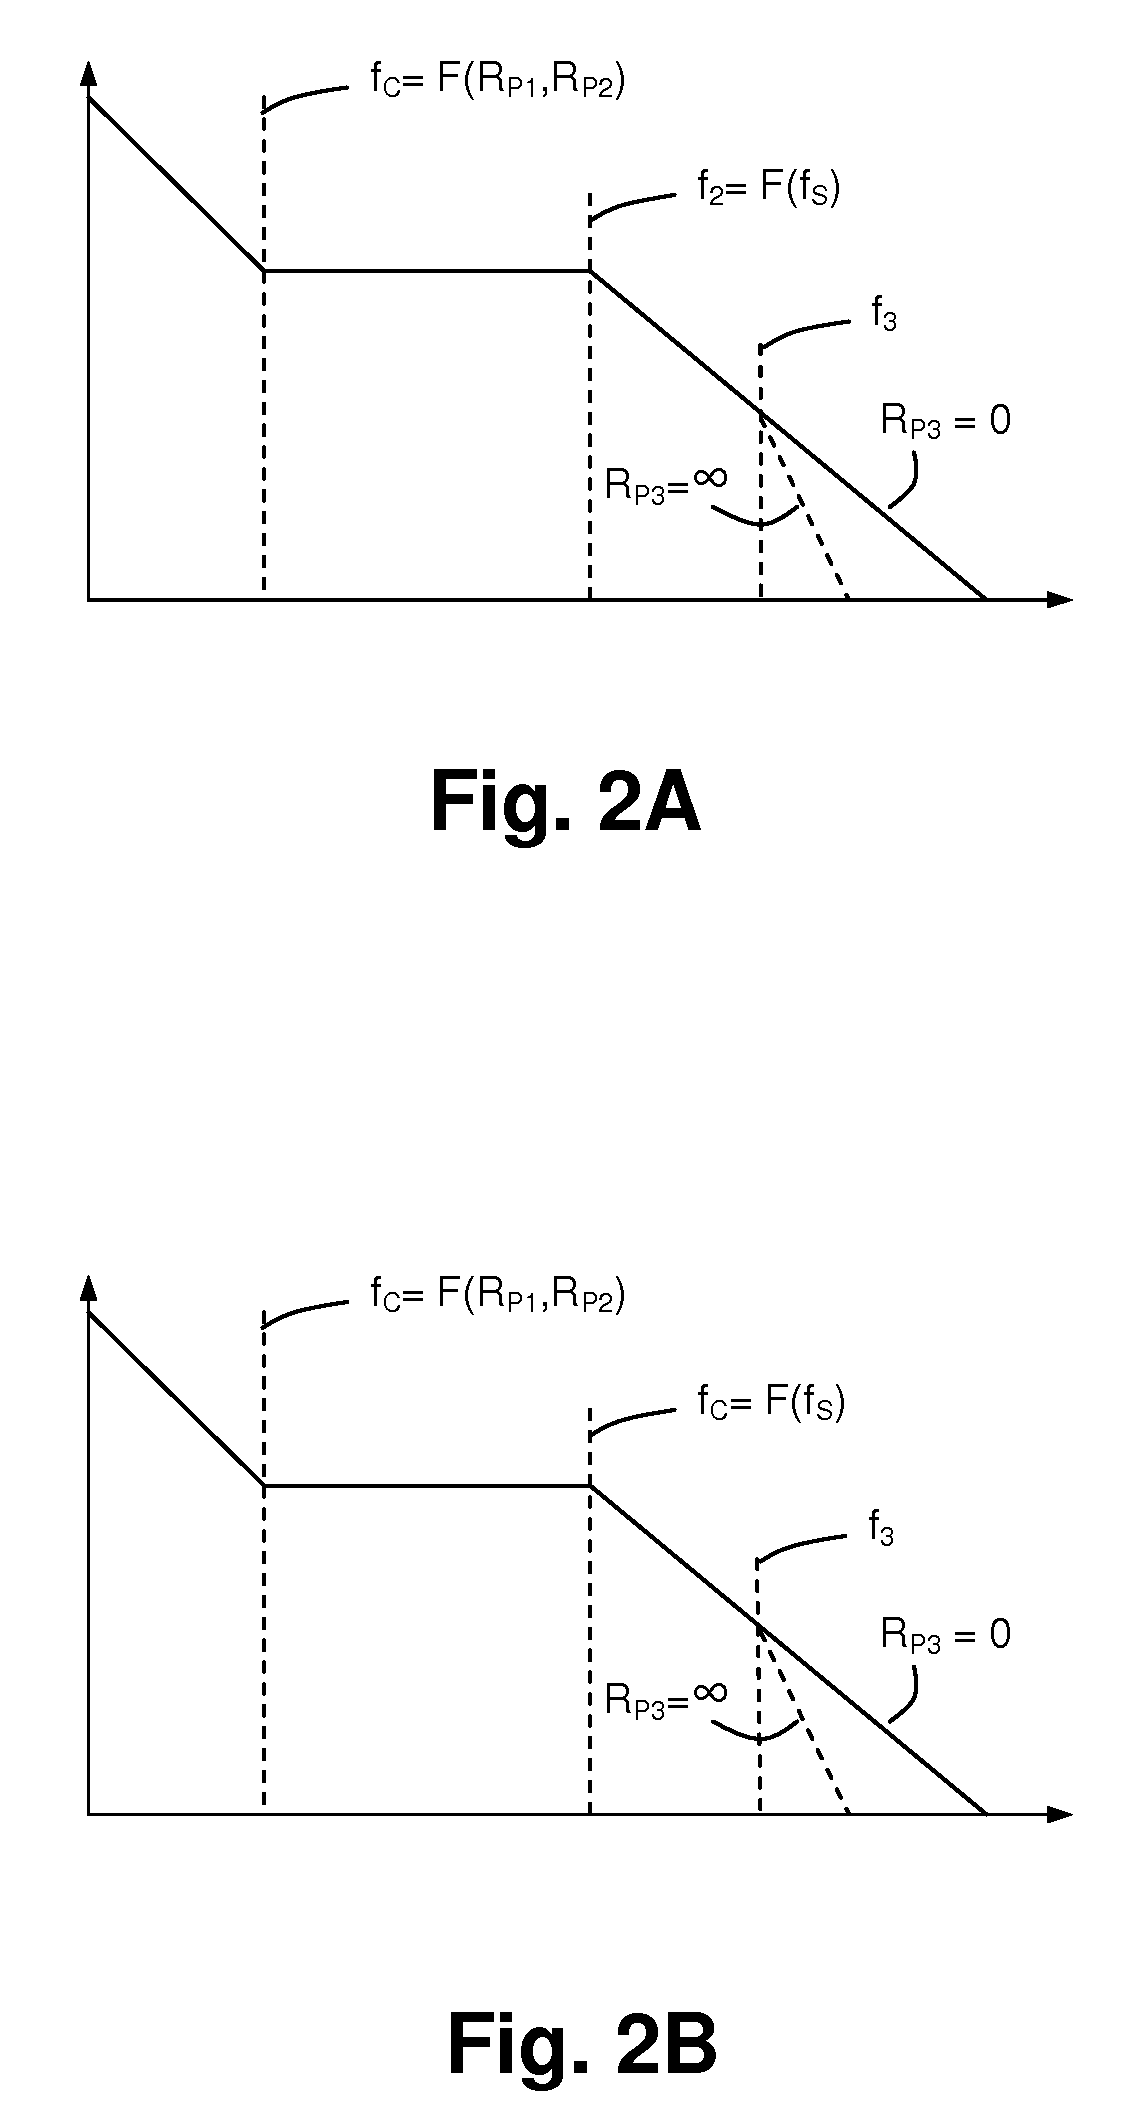 Switch-mode power supply (SMPS) controller integrated circuit determining operating characteristics from filter component information